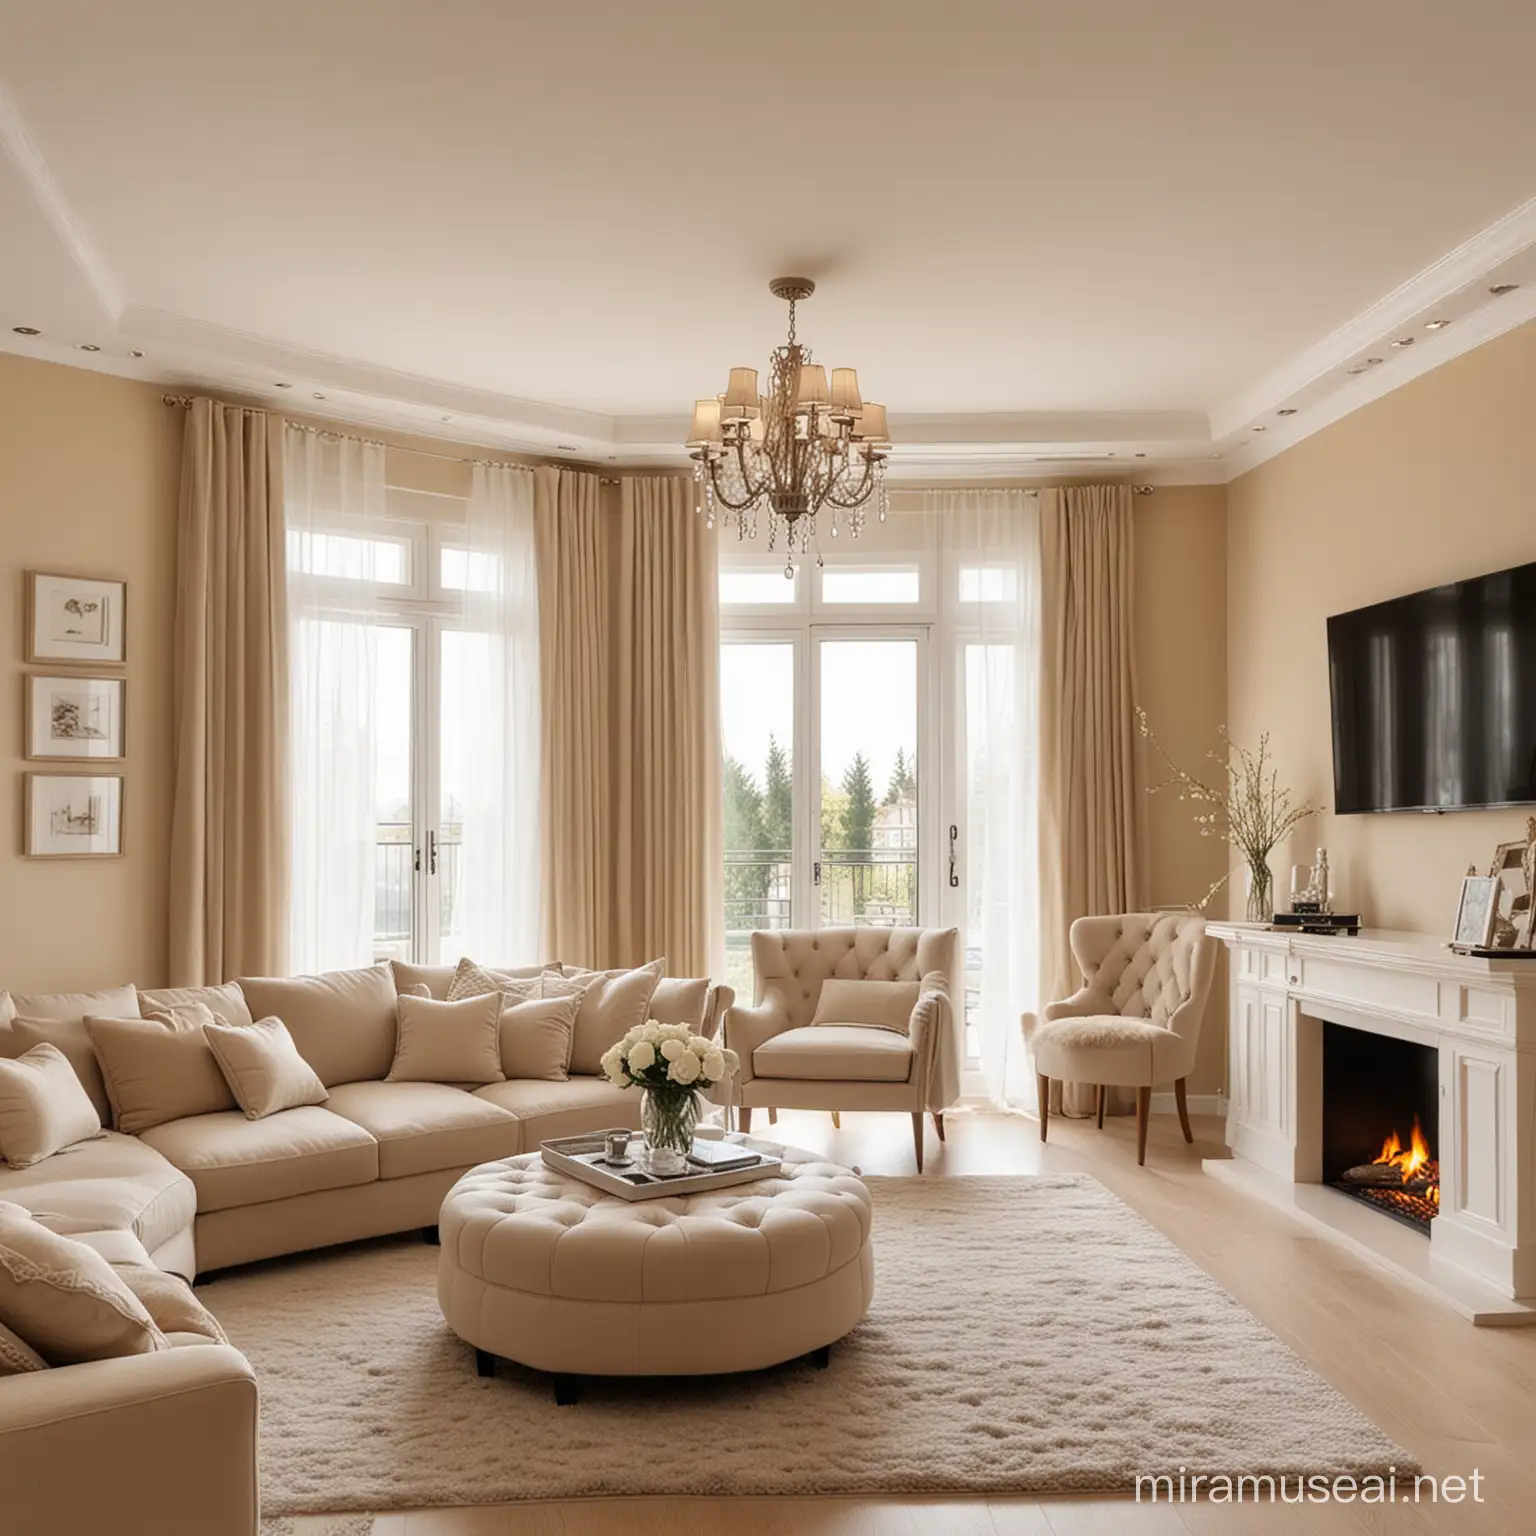 Cozy Beige Living Room Interior with Warm Ambiance